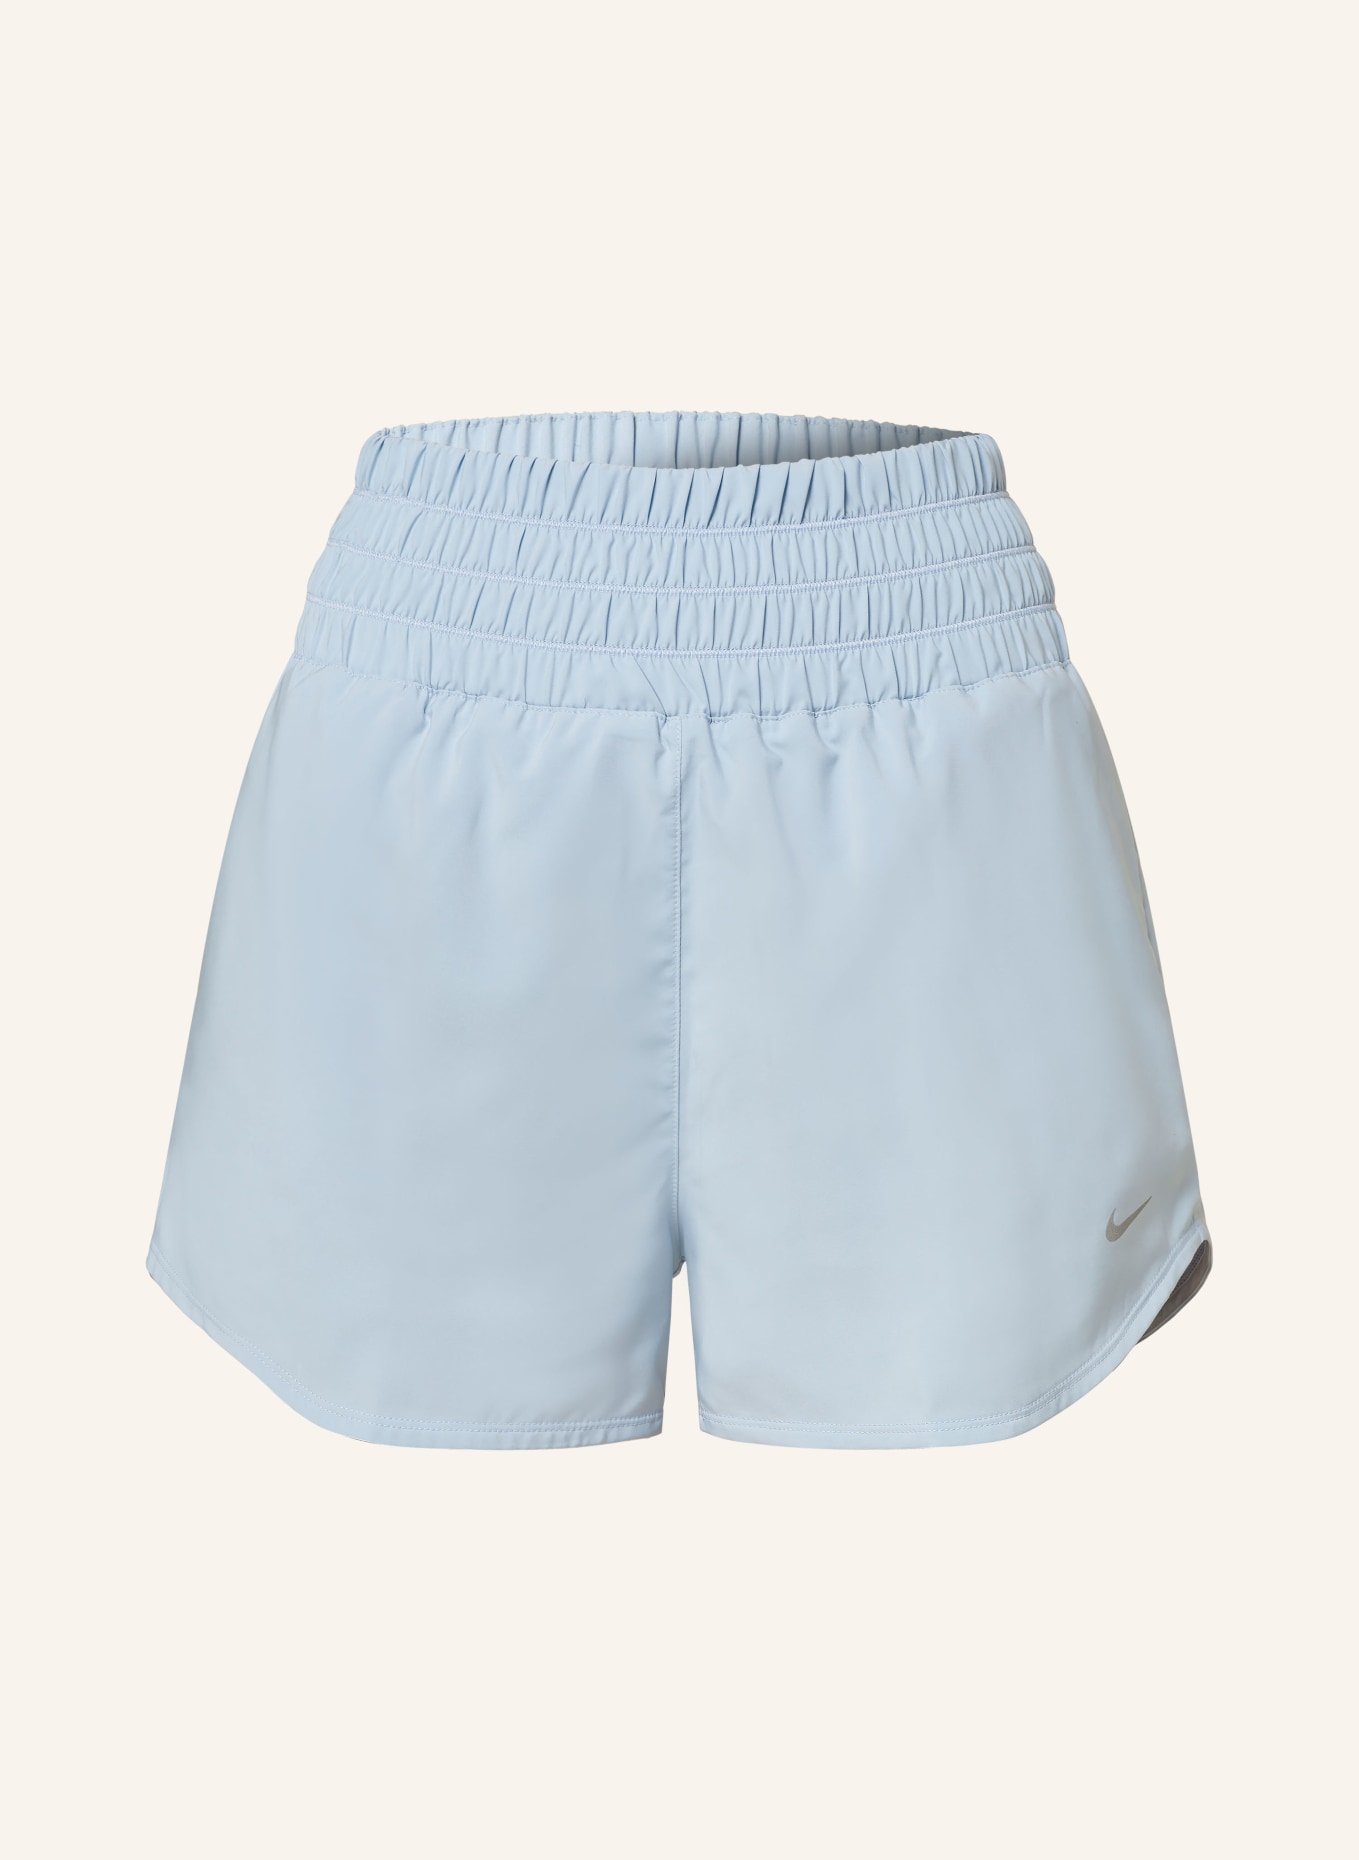 Nike 2-in-1 training shorts ONE, Color: LIGHT BLUE (Image 1)